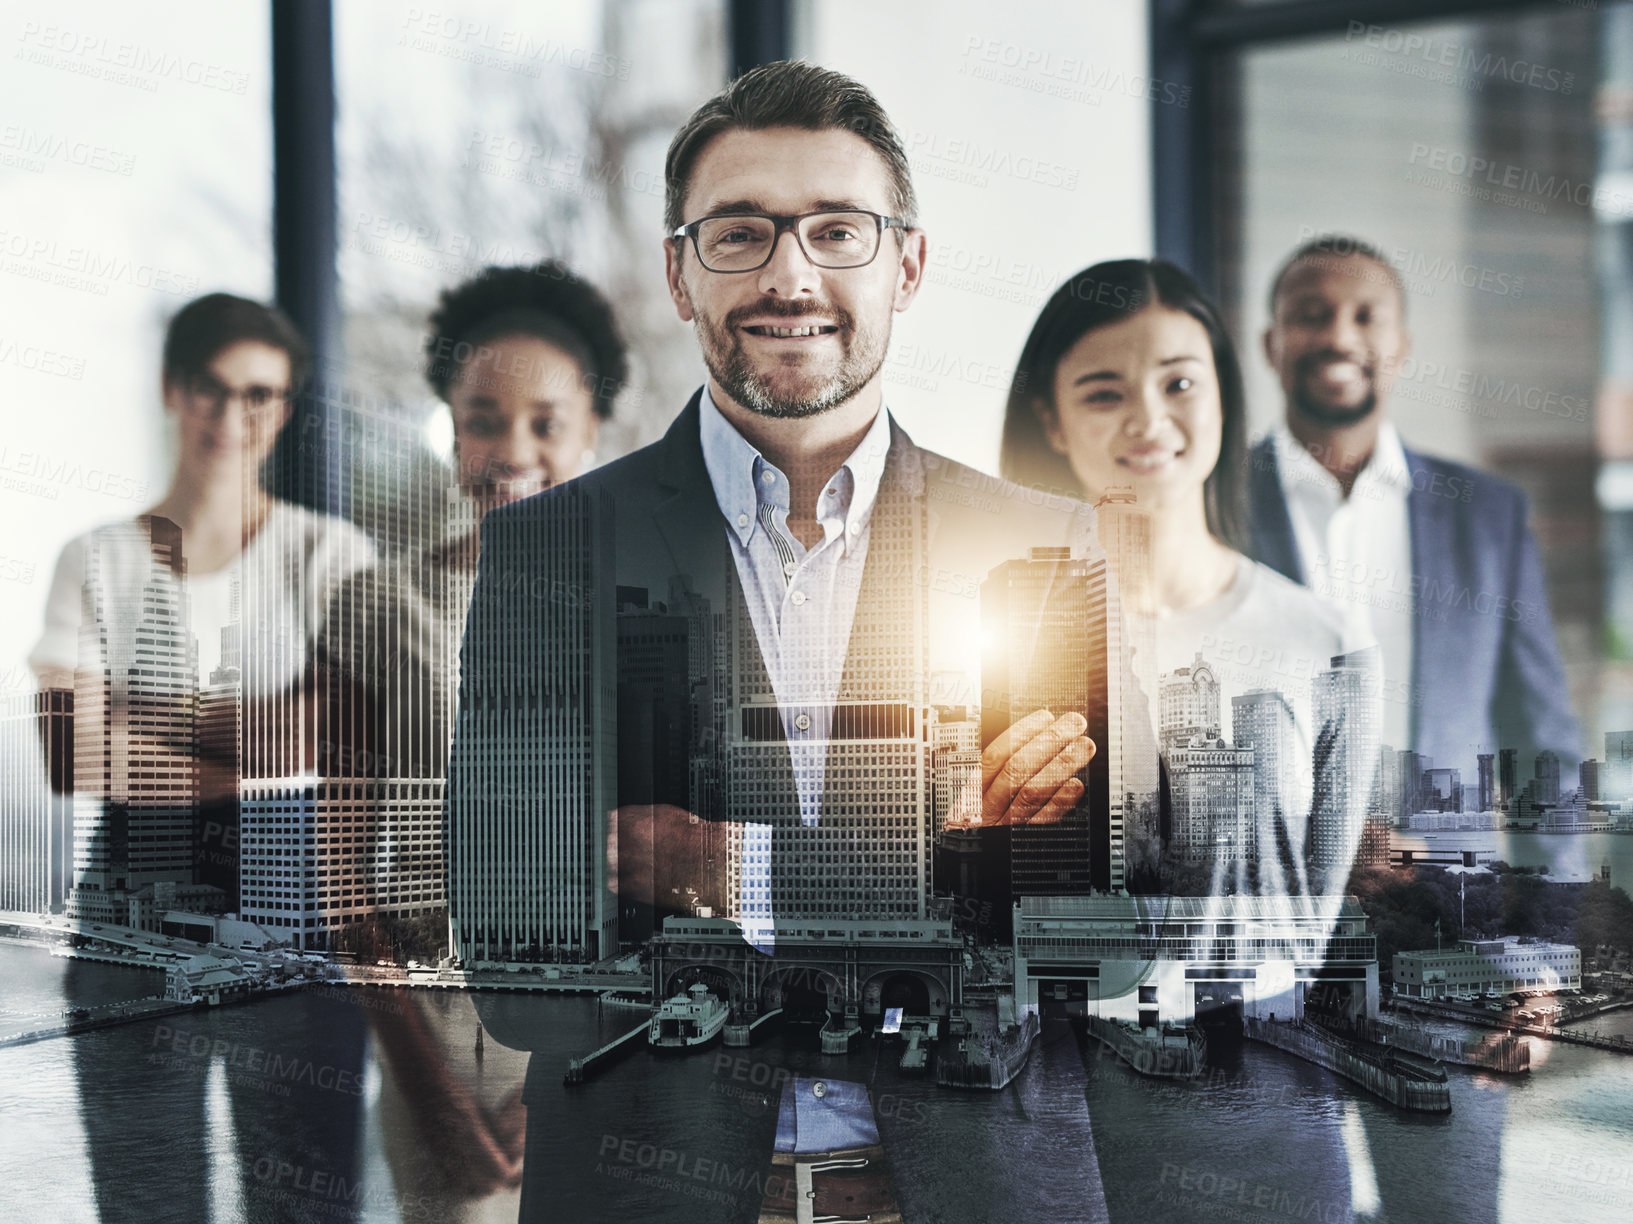 Buy stock photo Cropped portrait of a group of businesspeople standing with their arms crossed in the office